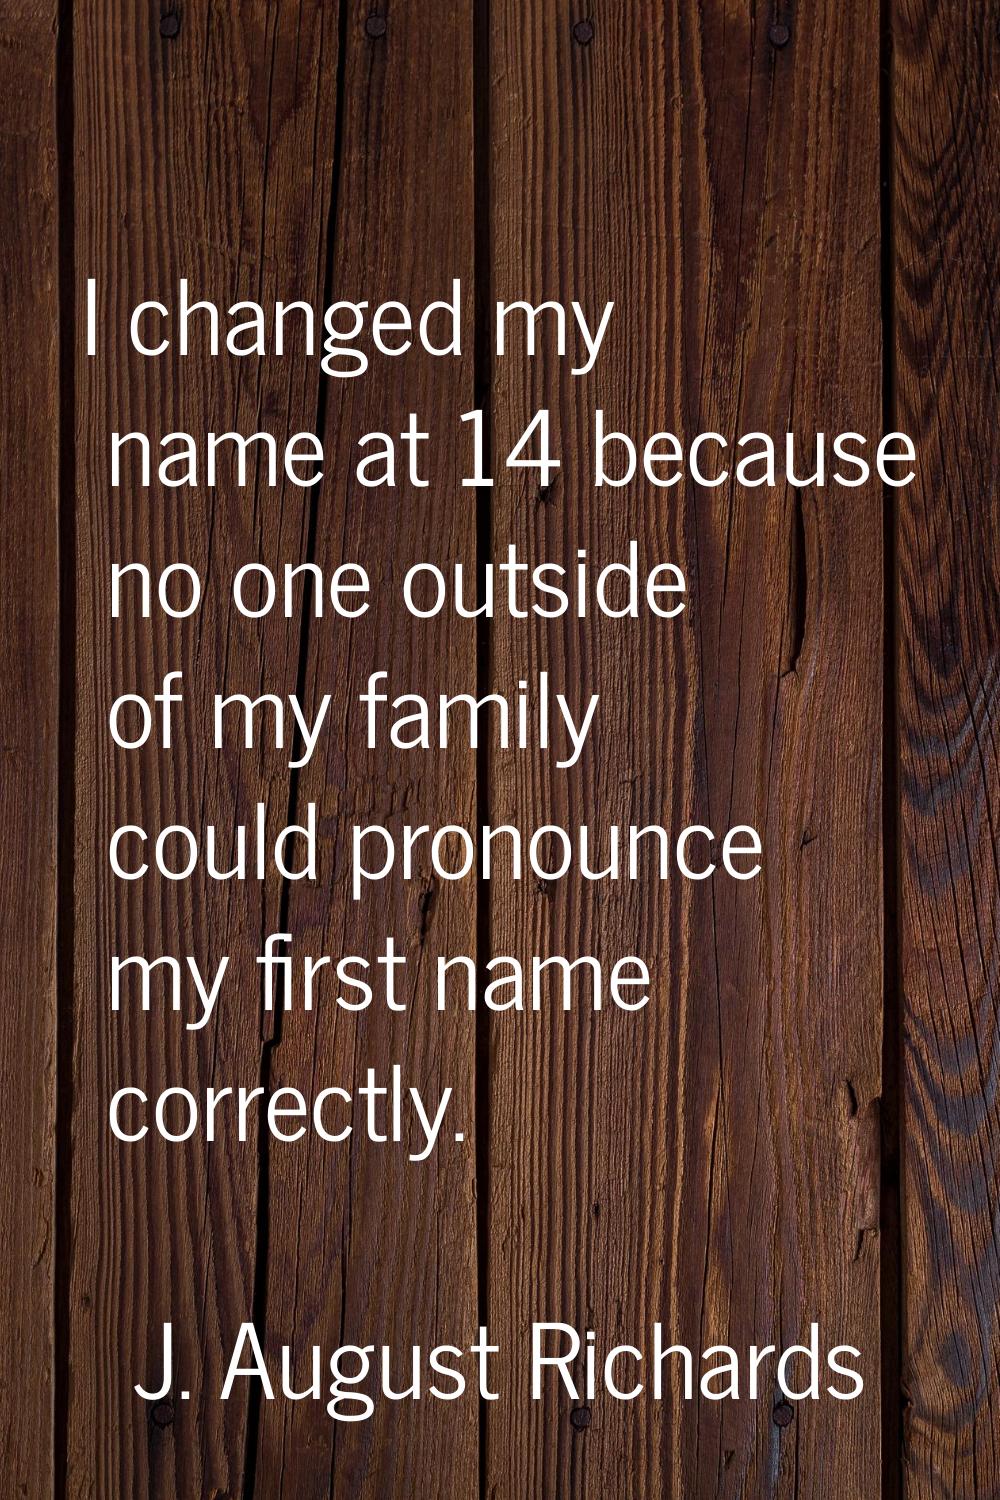 I changed my name at 14 because no one outside of my family could pronounce my first name correctly